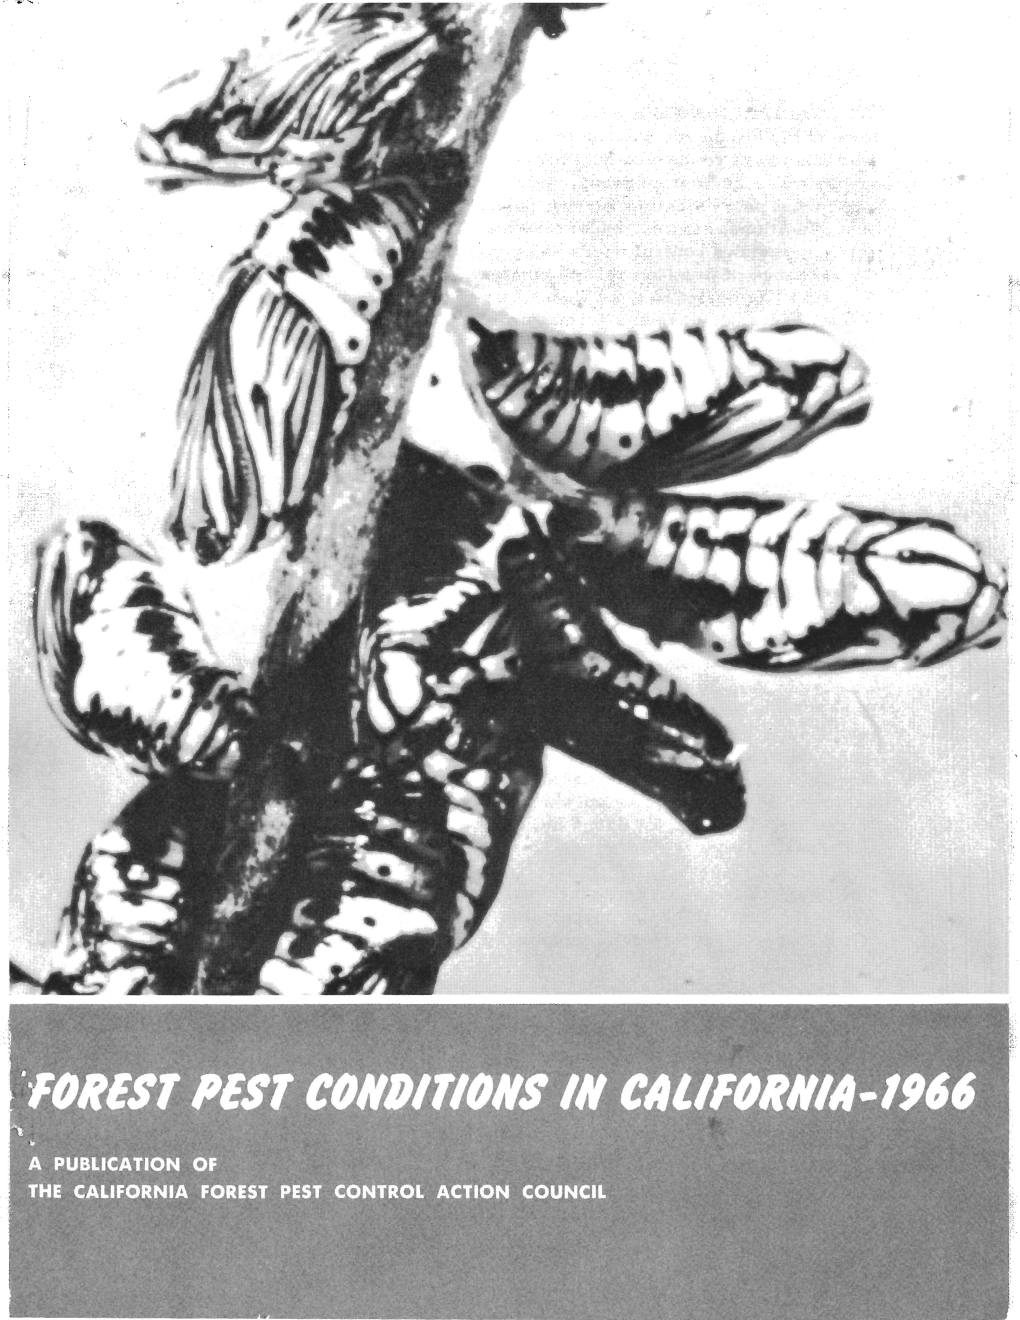 Forest Pest Conditions in California, 1966